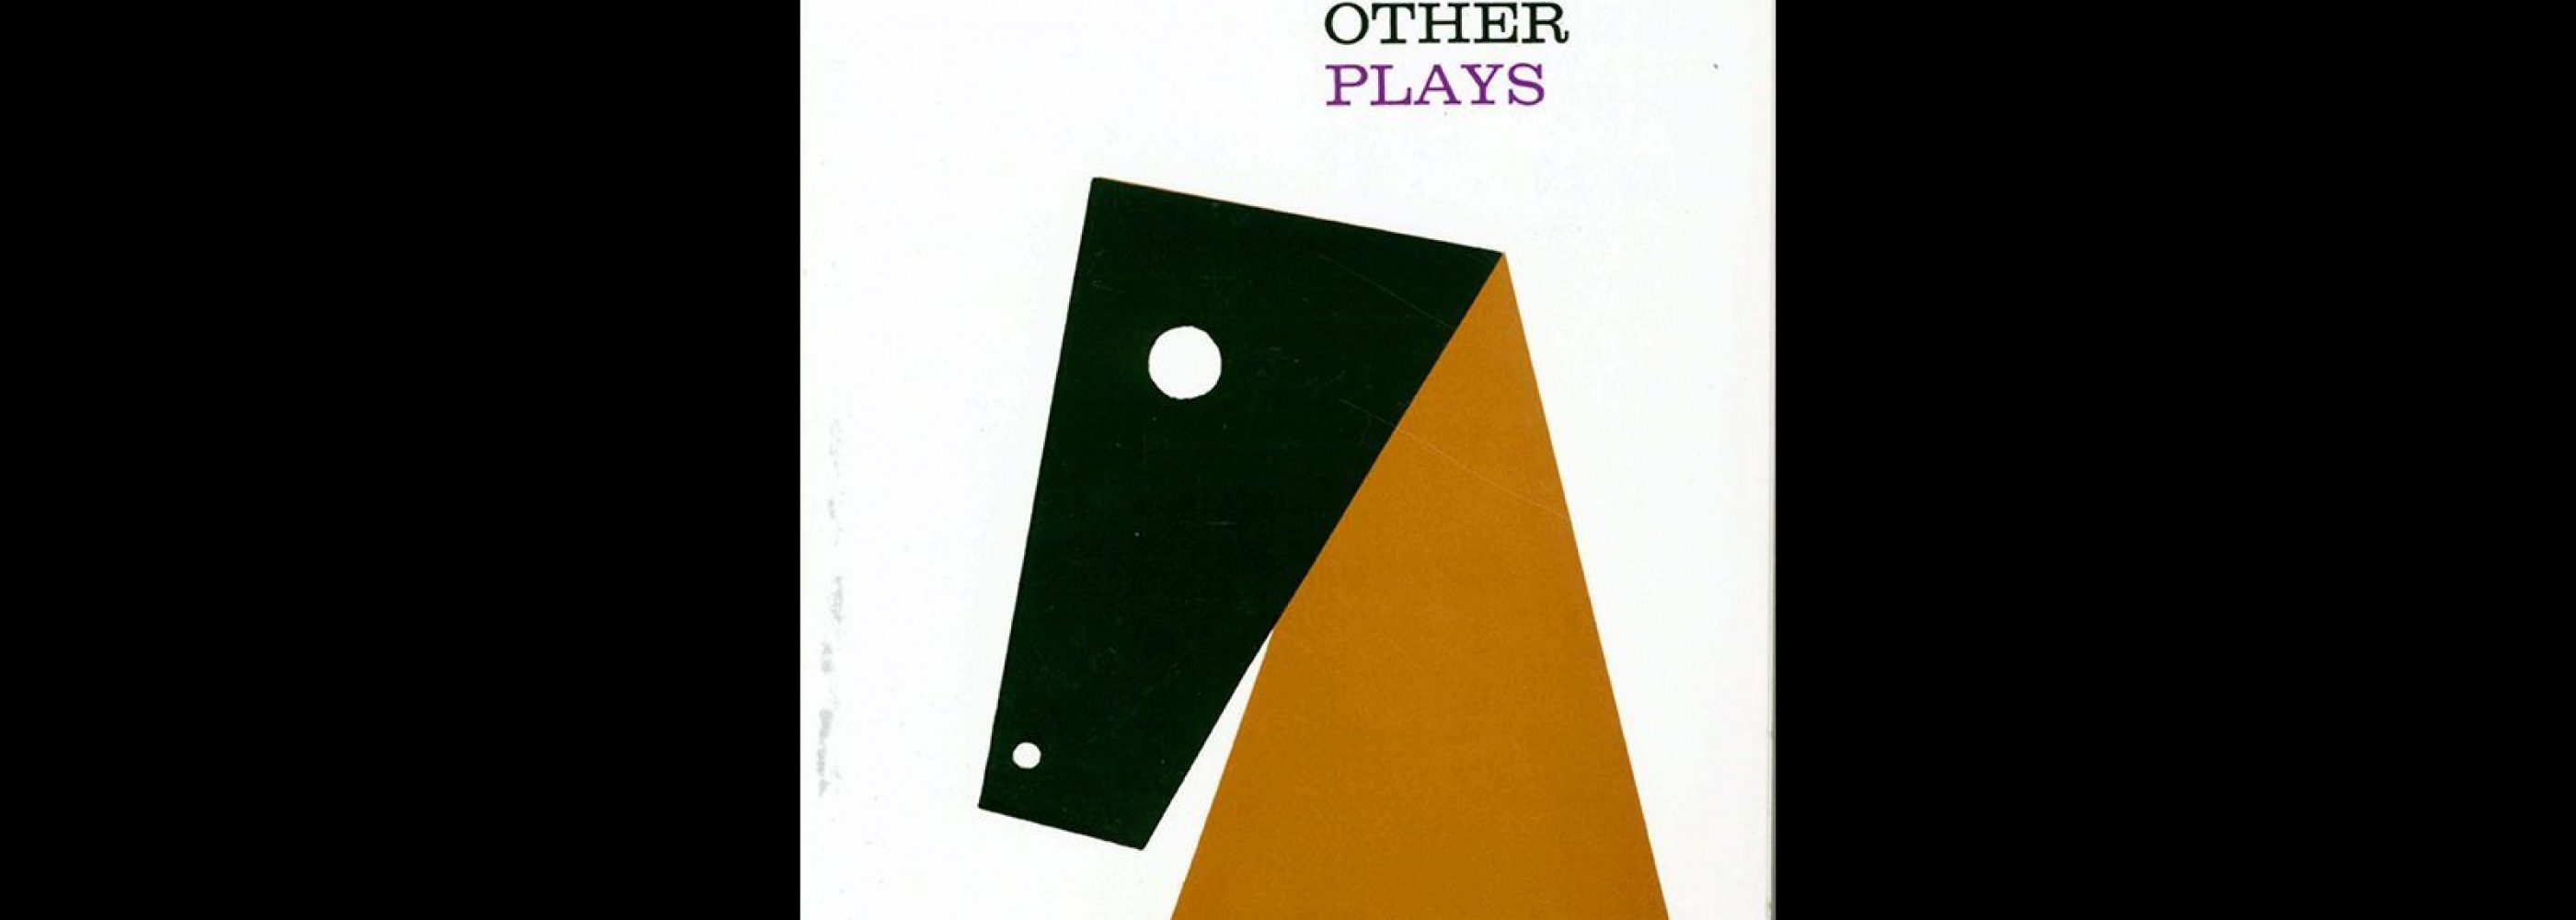 Caligula and 3 Other Plays, A Vintage Book, 1962. Cover design by George Giusti